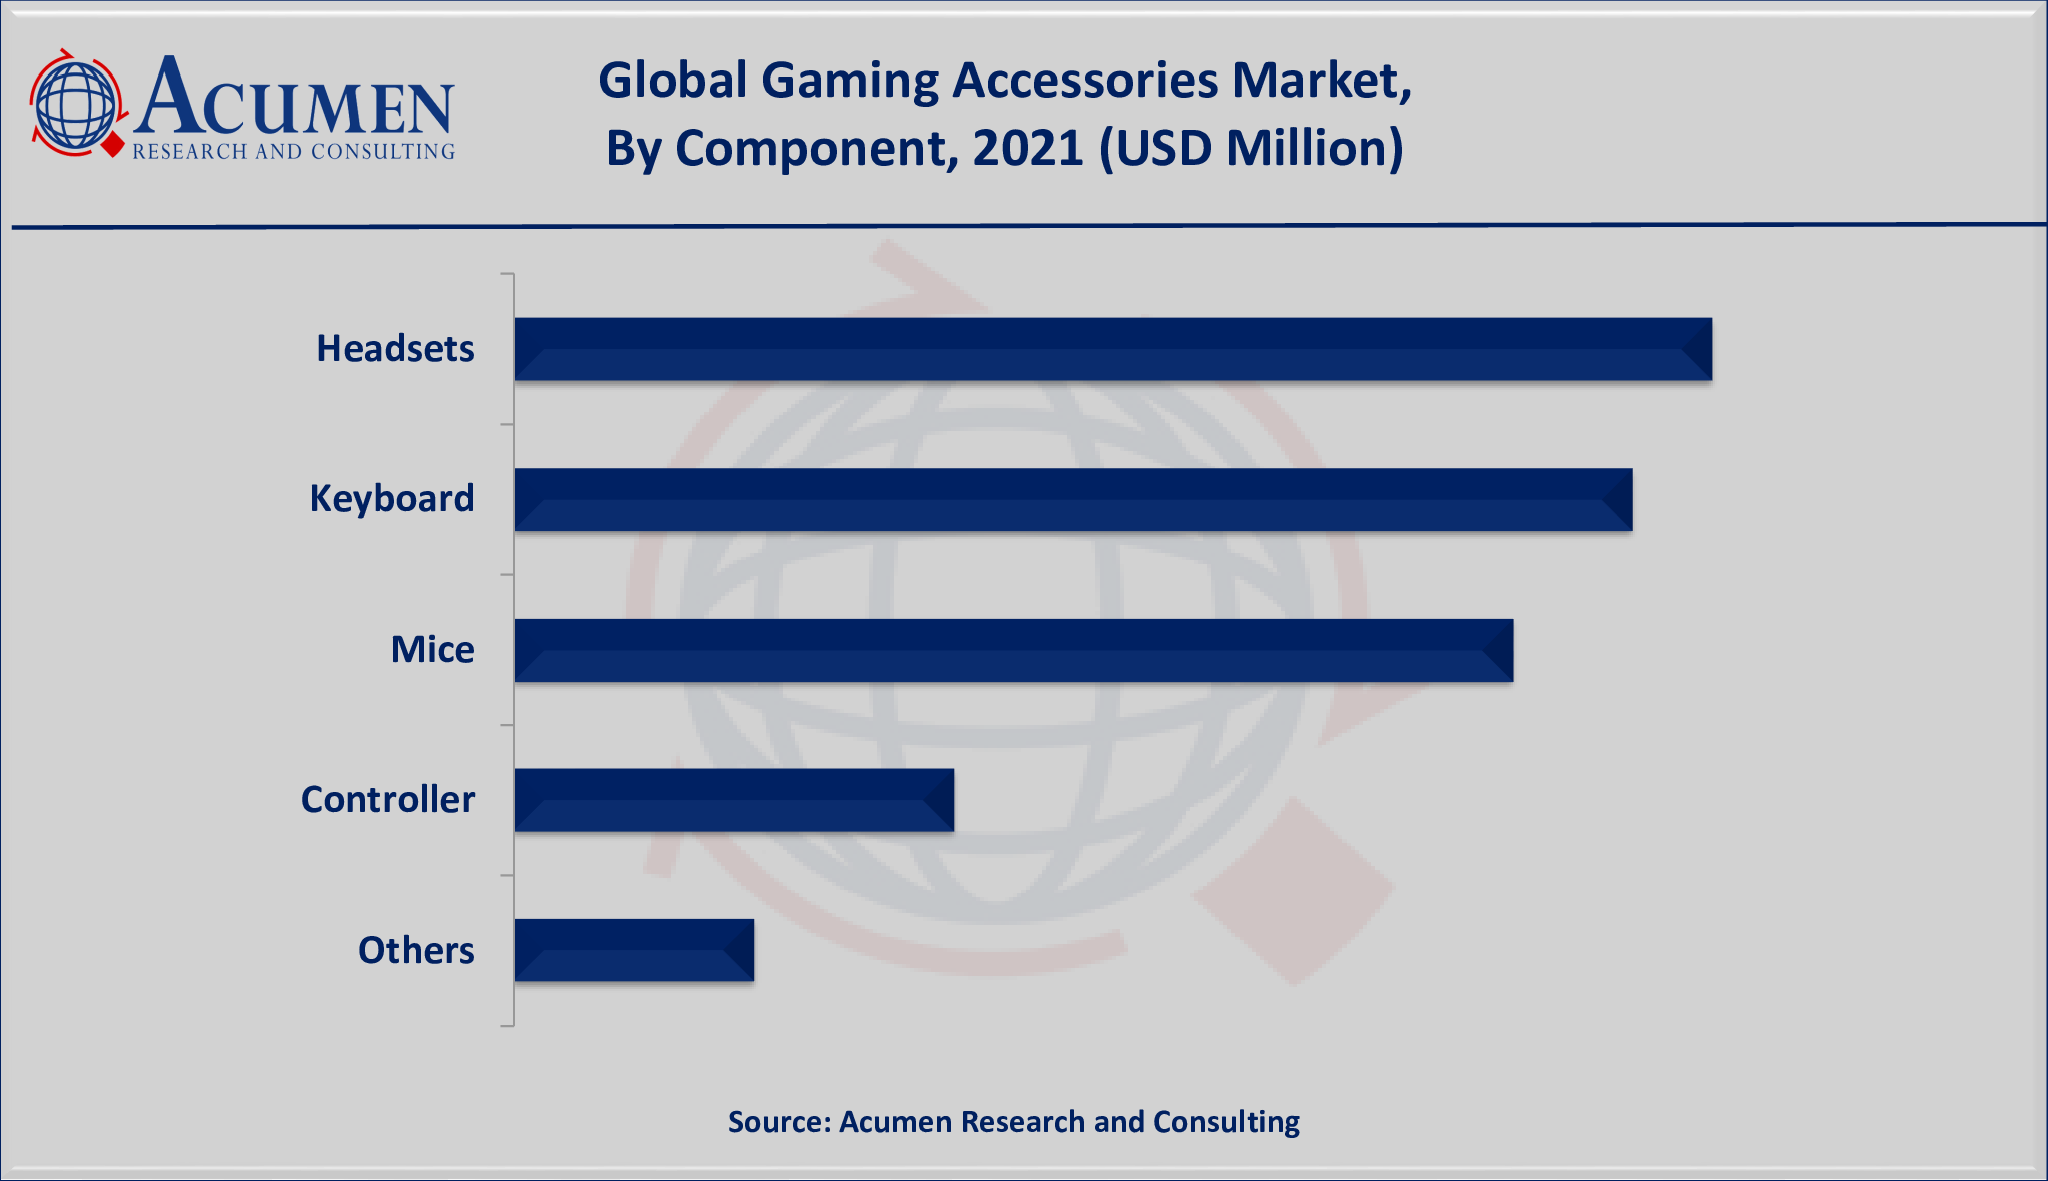 Gaming Accessories Market Share accounted for USD 6,708 Million in 2021 and is projected to reach a market size of USD 16,774 Million by 2030; growing at a CAGR of 10.8%